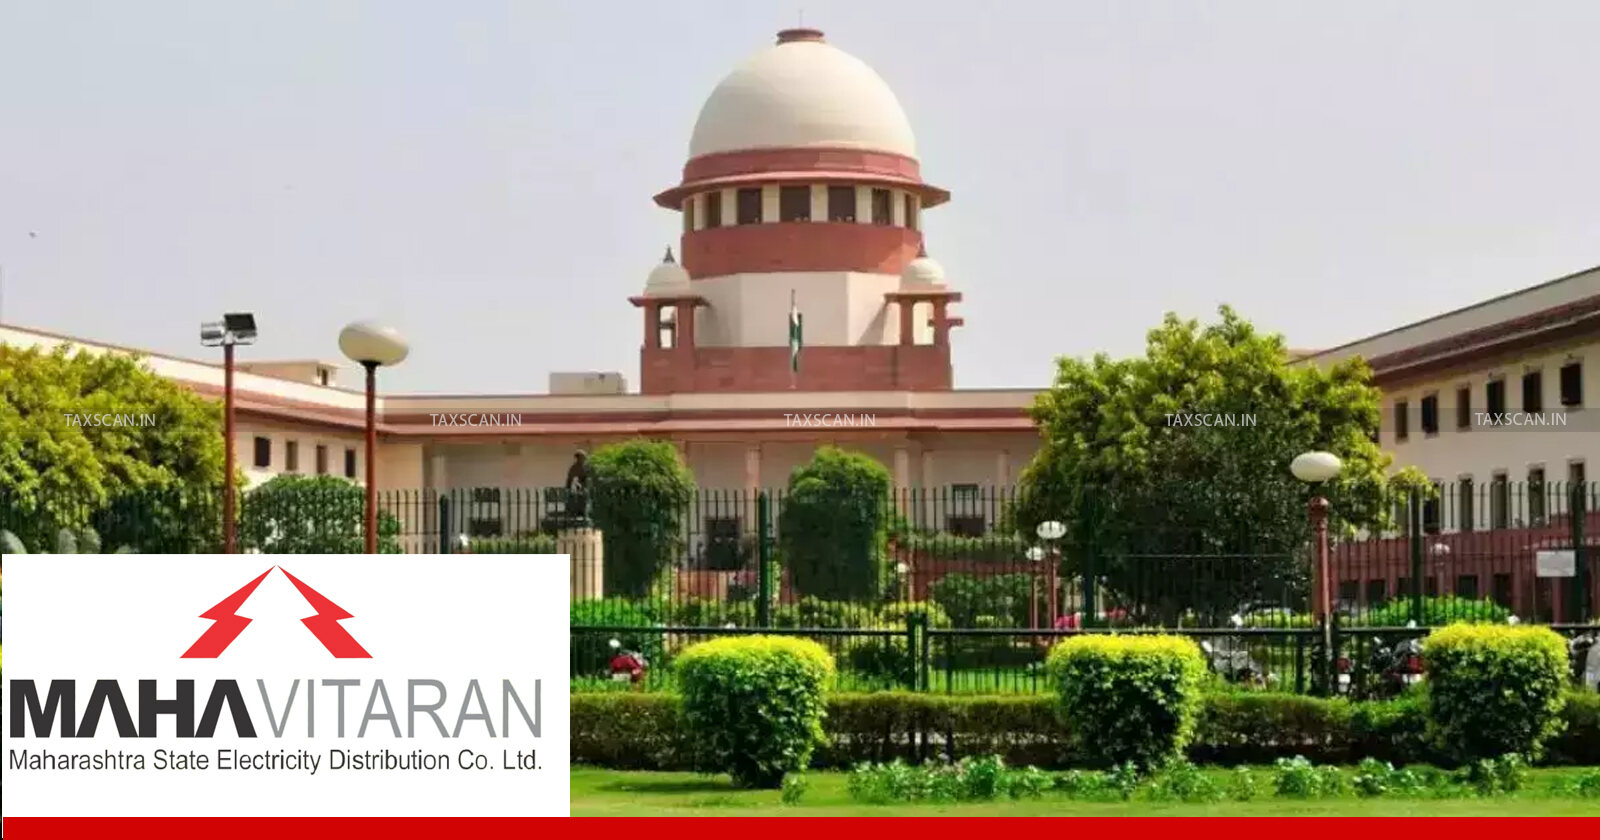 Disallowance - owing - State Government - Grants - Cost - Capital Assets - Supreme Court - issues Notice - Maharashtra State Electricity Distribution - taxscan